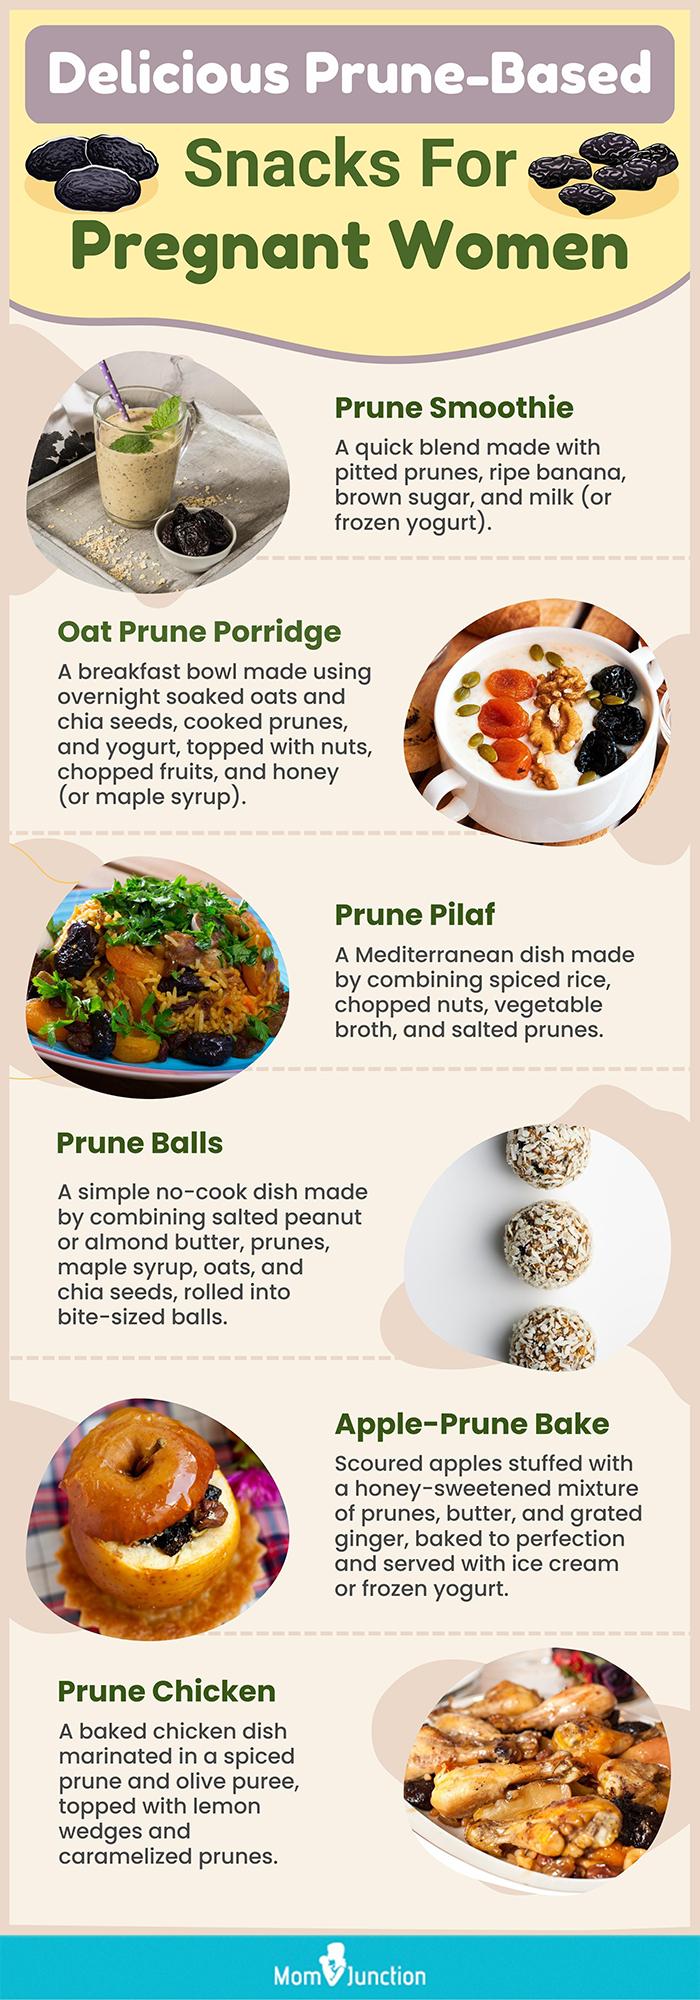 delicious prune based snacks for pregnant women (infographic)